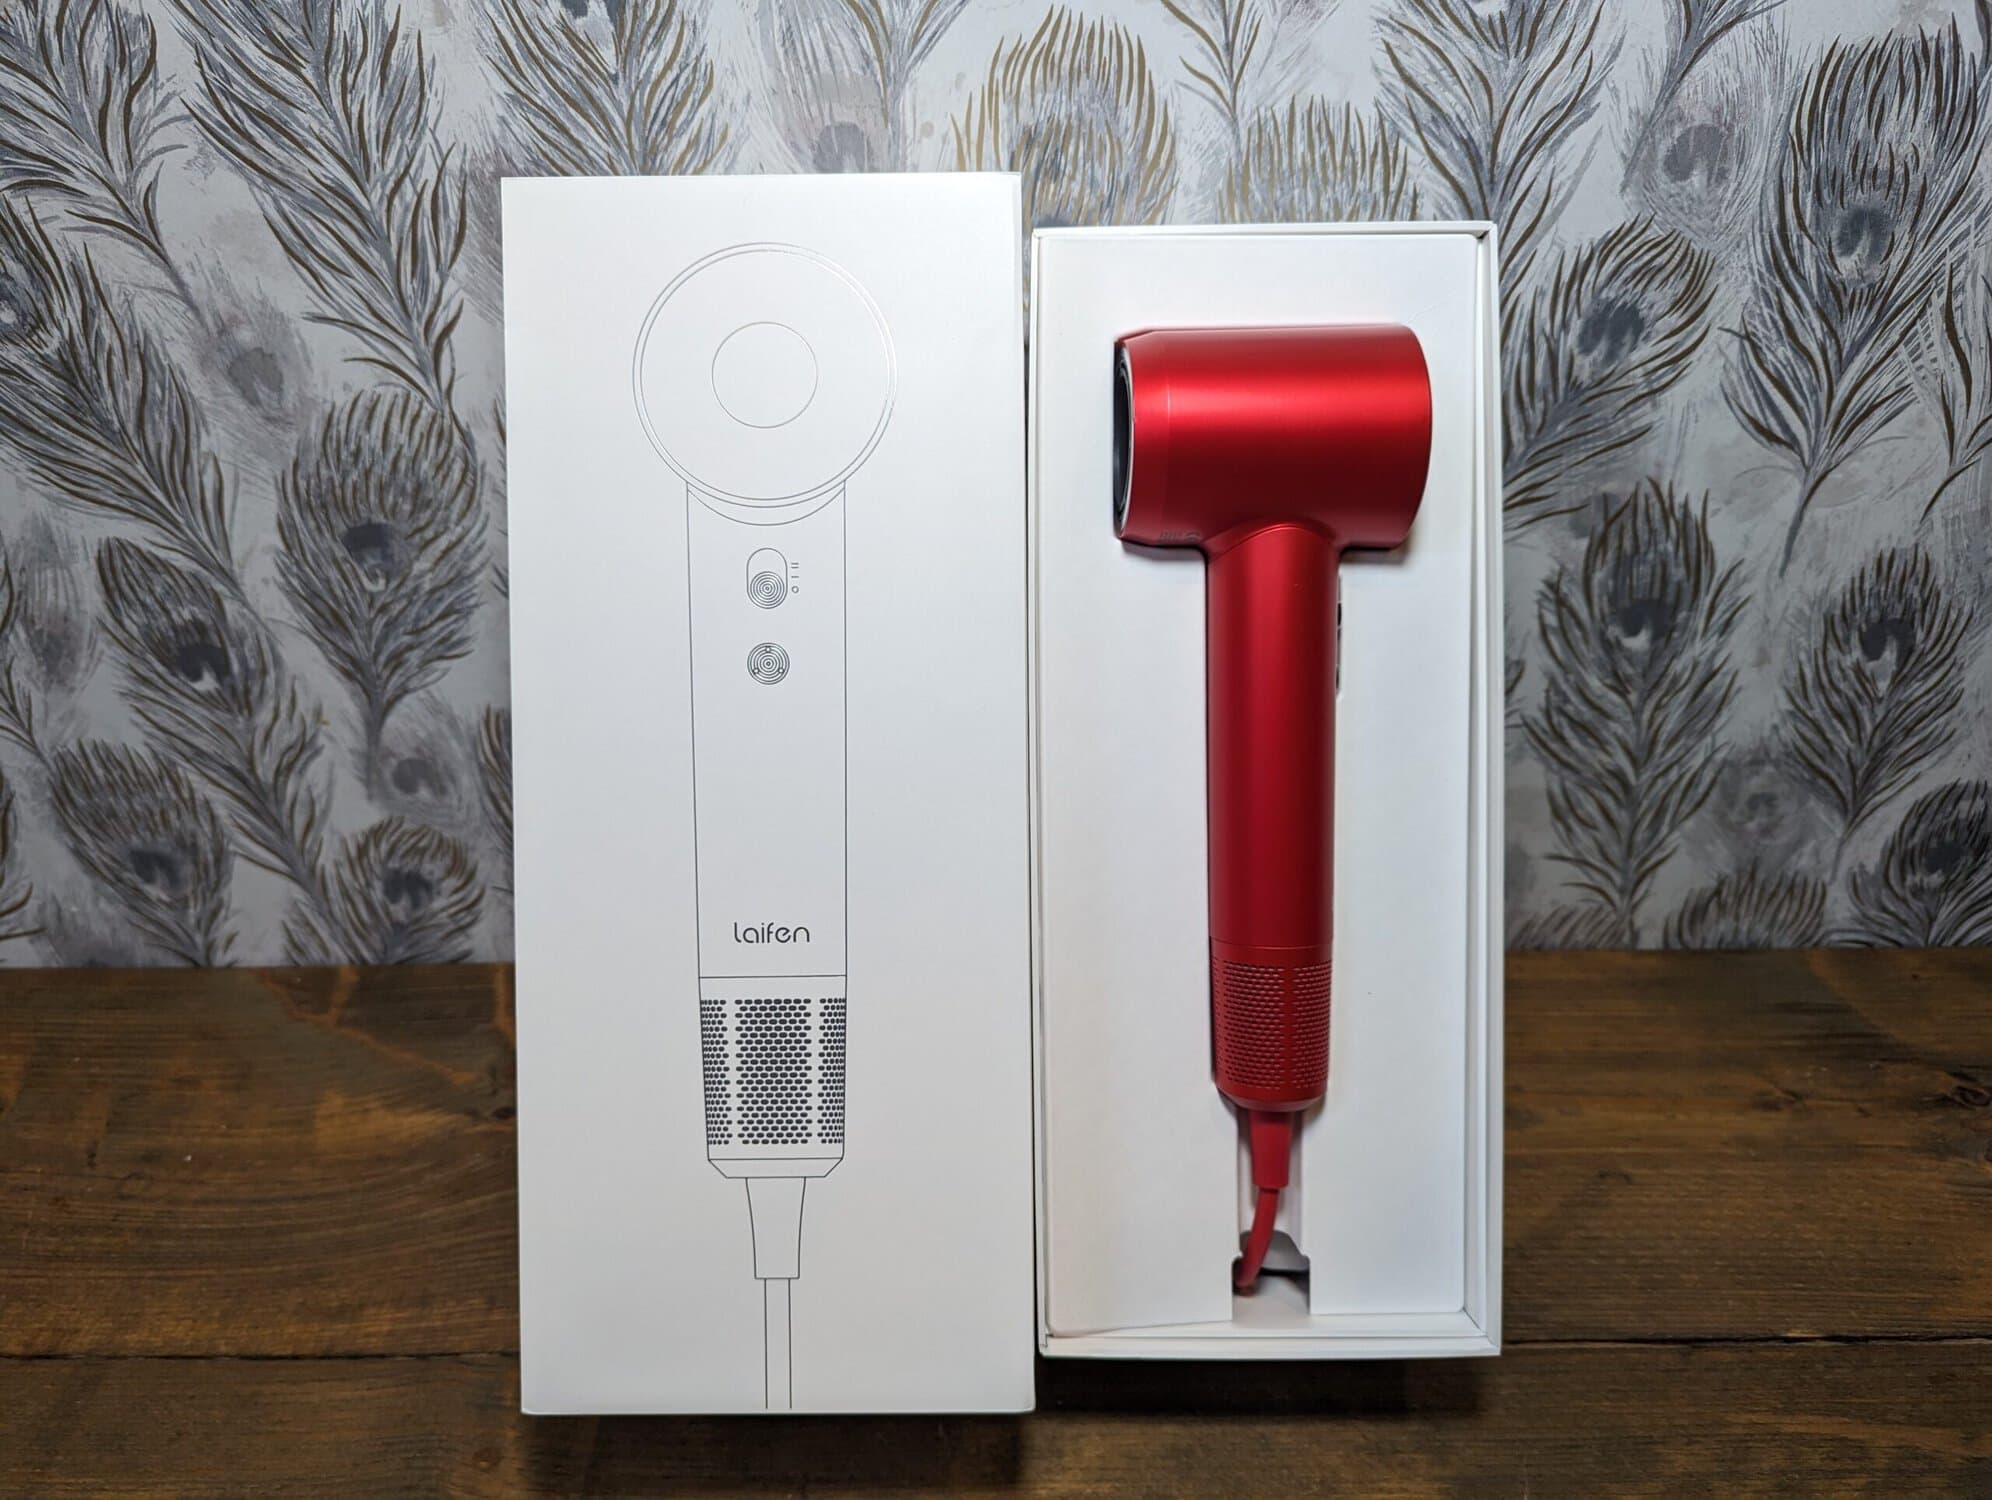 Laifen Swift Special Hair Dryer Review – Affordable Alternative vs Dyson Supersonic